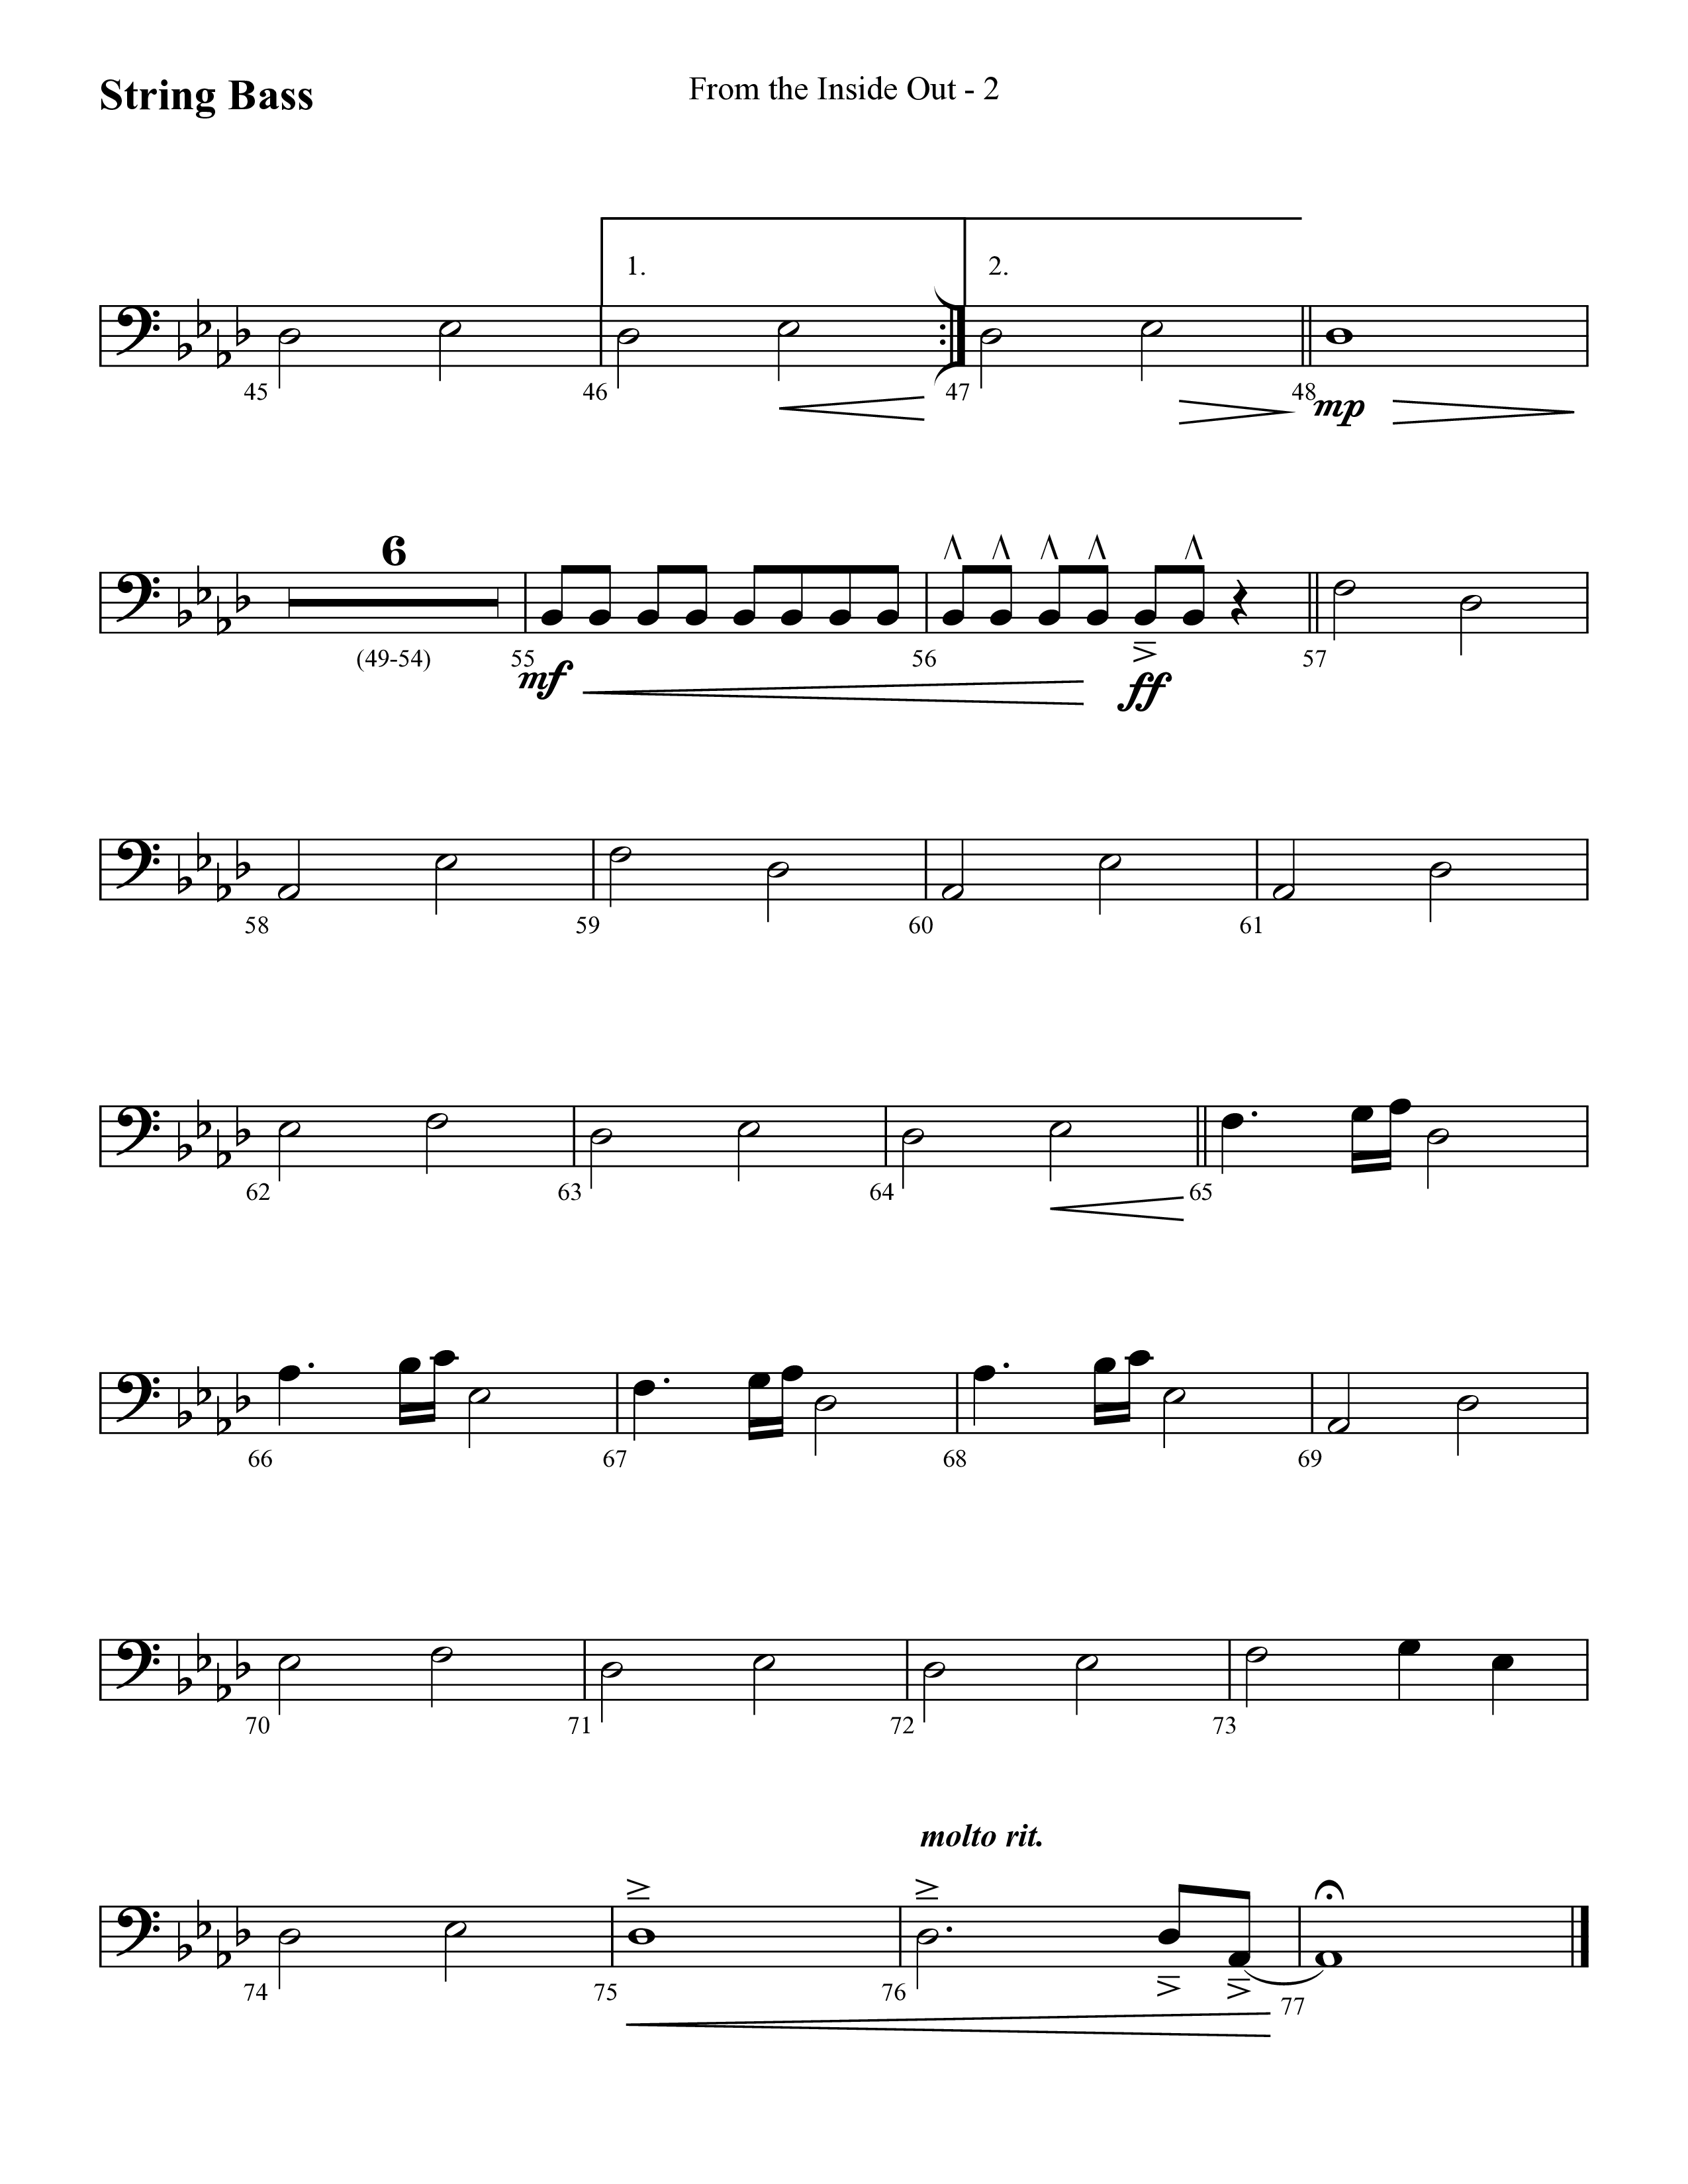 From The Inside Out (Choral Anthem SATB) String Bass (Lifeway Choral / Arr. Cliff Duren)